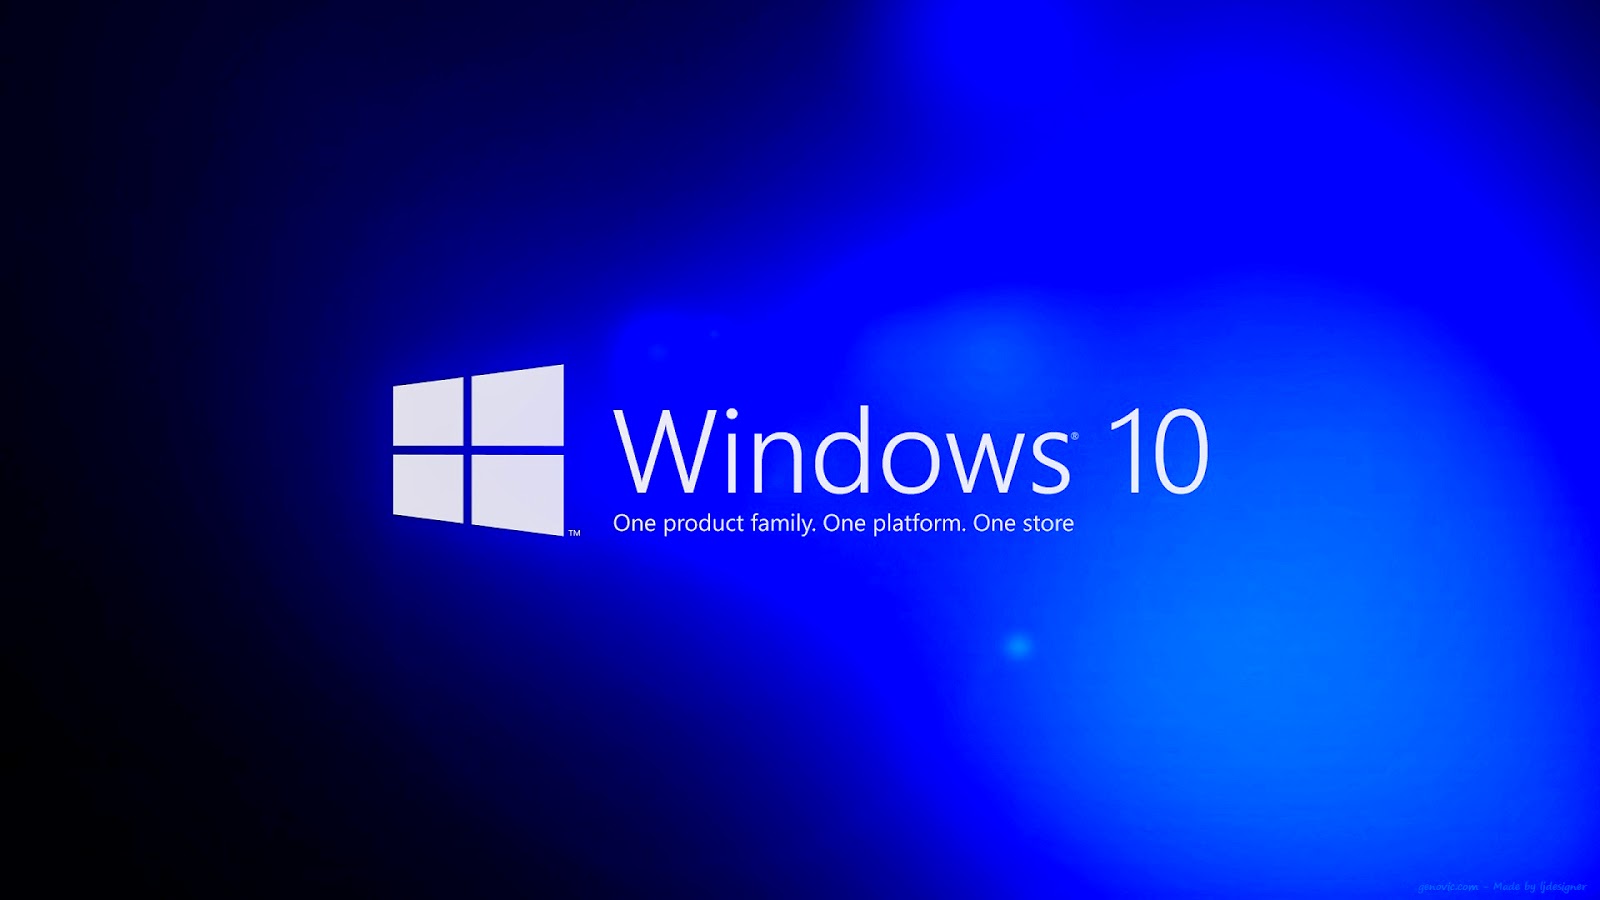 Amd Leaks Microsoft S Plans For Upcoming Windows 10 Launch Ll New Updates